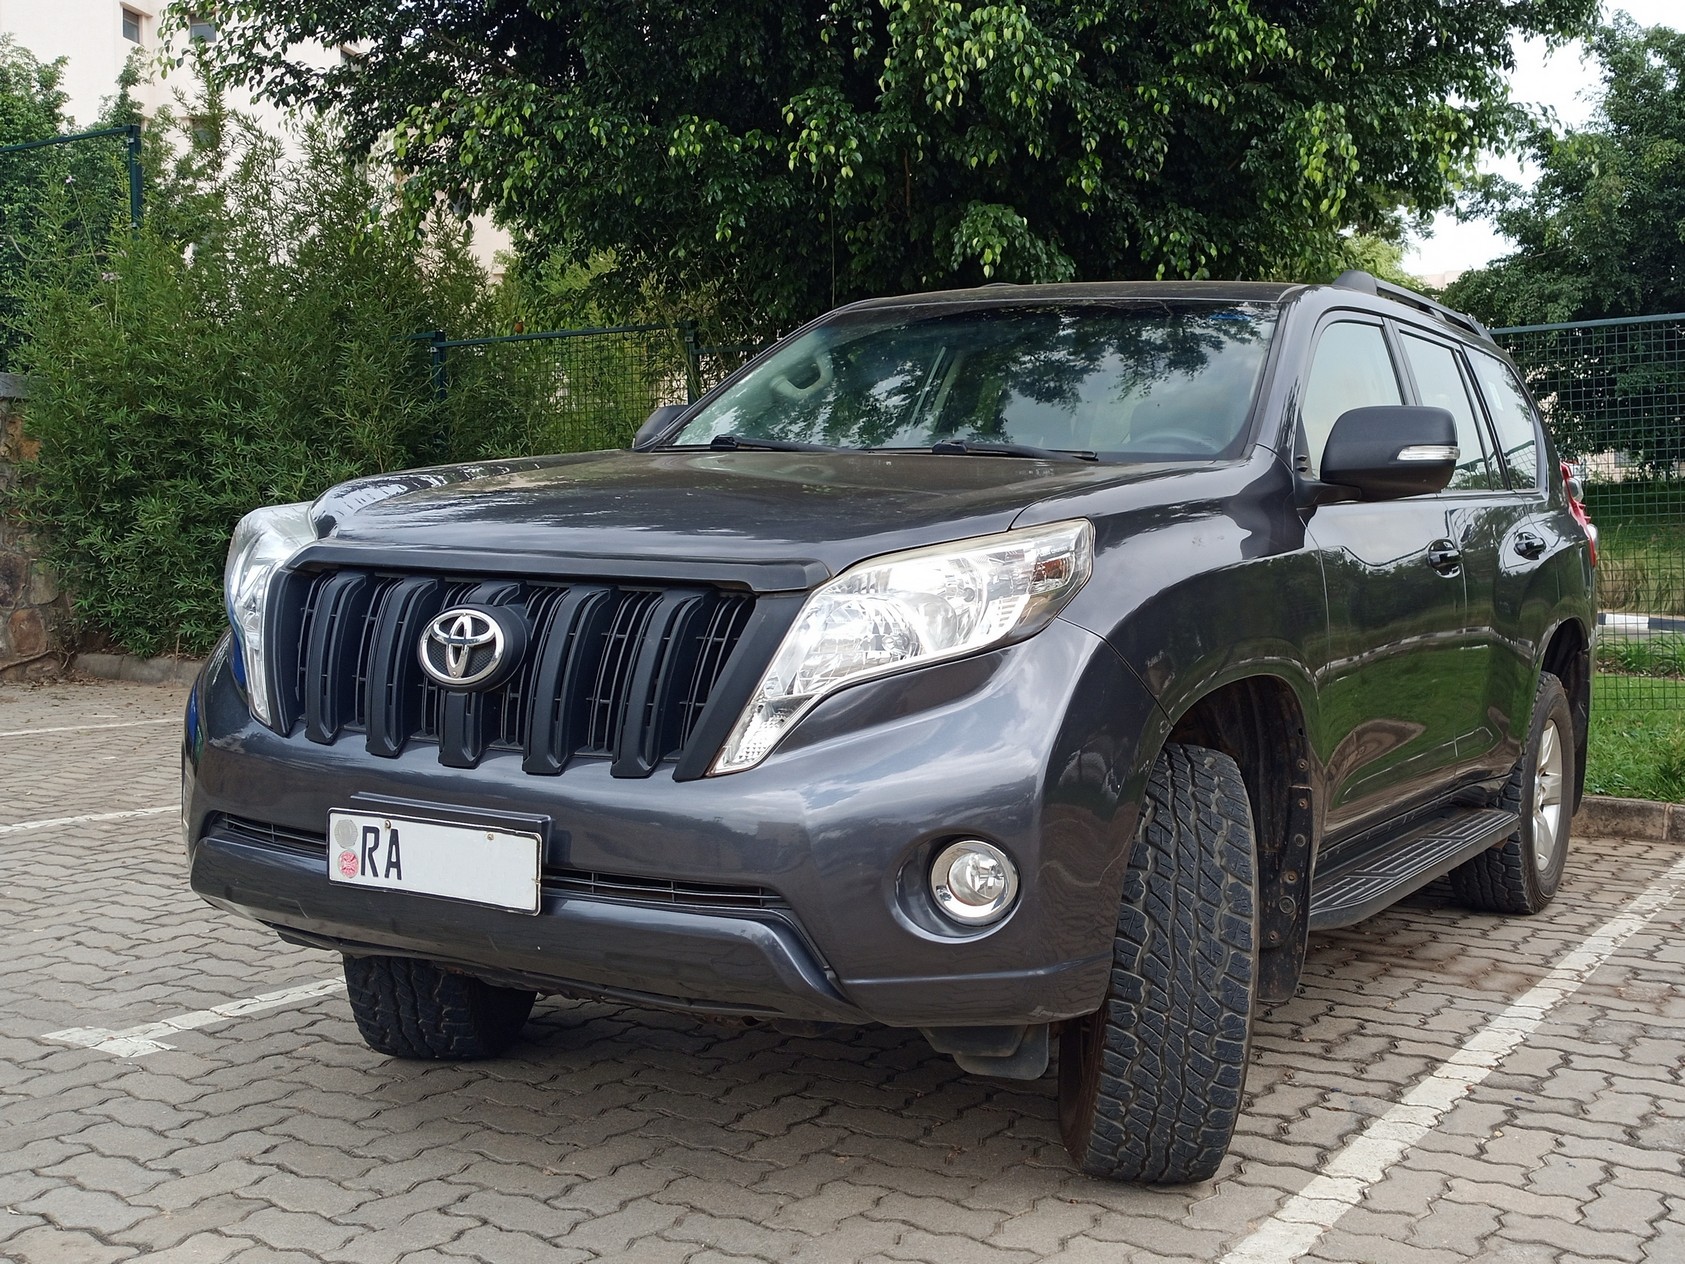 Toyota Land Cruiser Prado 2013, no previous owner, fully registered, genuine 158,000 km, new parts (tyres, clutch, battery), full service history with Toyota Rwanda Ltd.